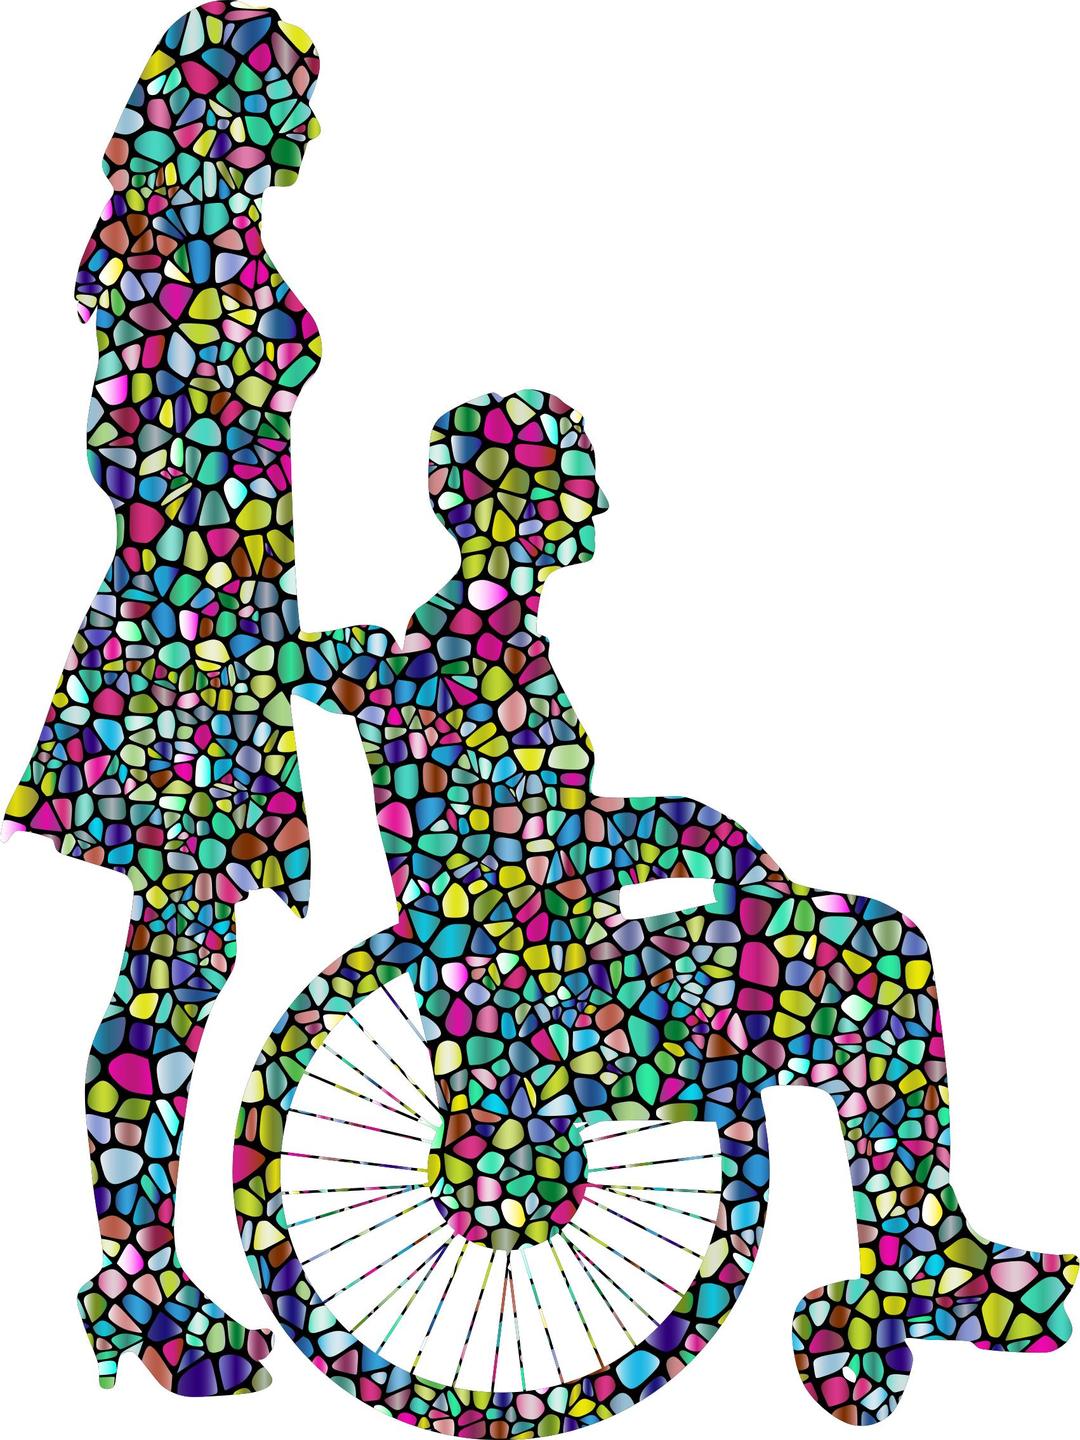 Polyprismatic Tiled Woman Pushing Man In Wheelchair Silhouette With Background png transparent